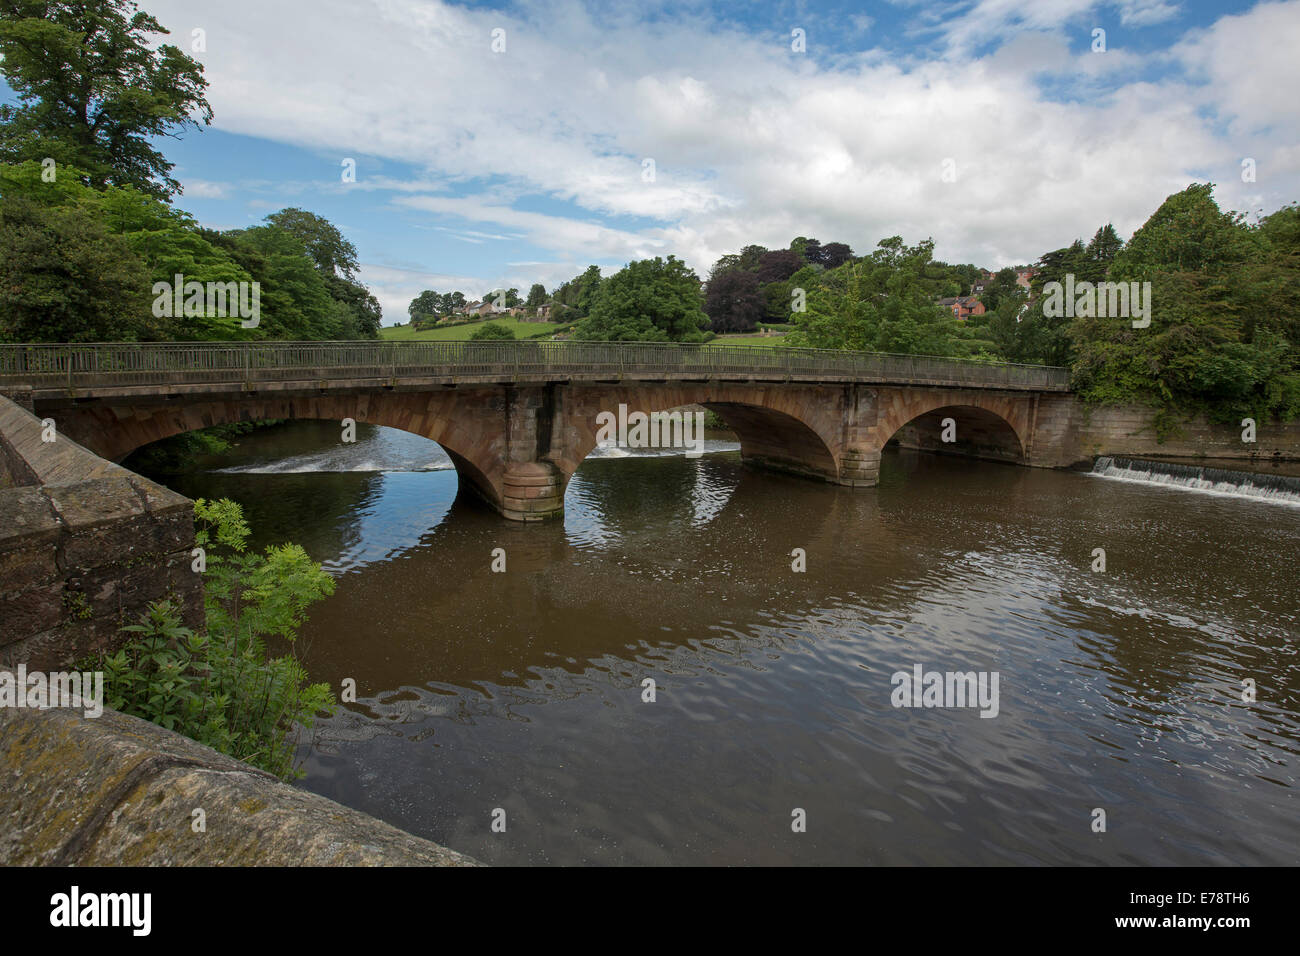 Ornate arched bridge over River Derwent, with bridge, trees, and blue sky reflected in calm water at English village of Belper Stock Photo